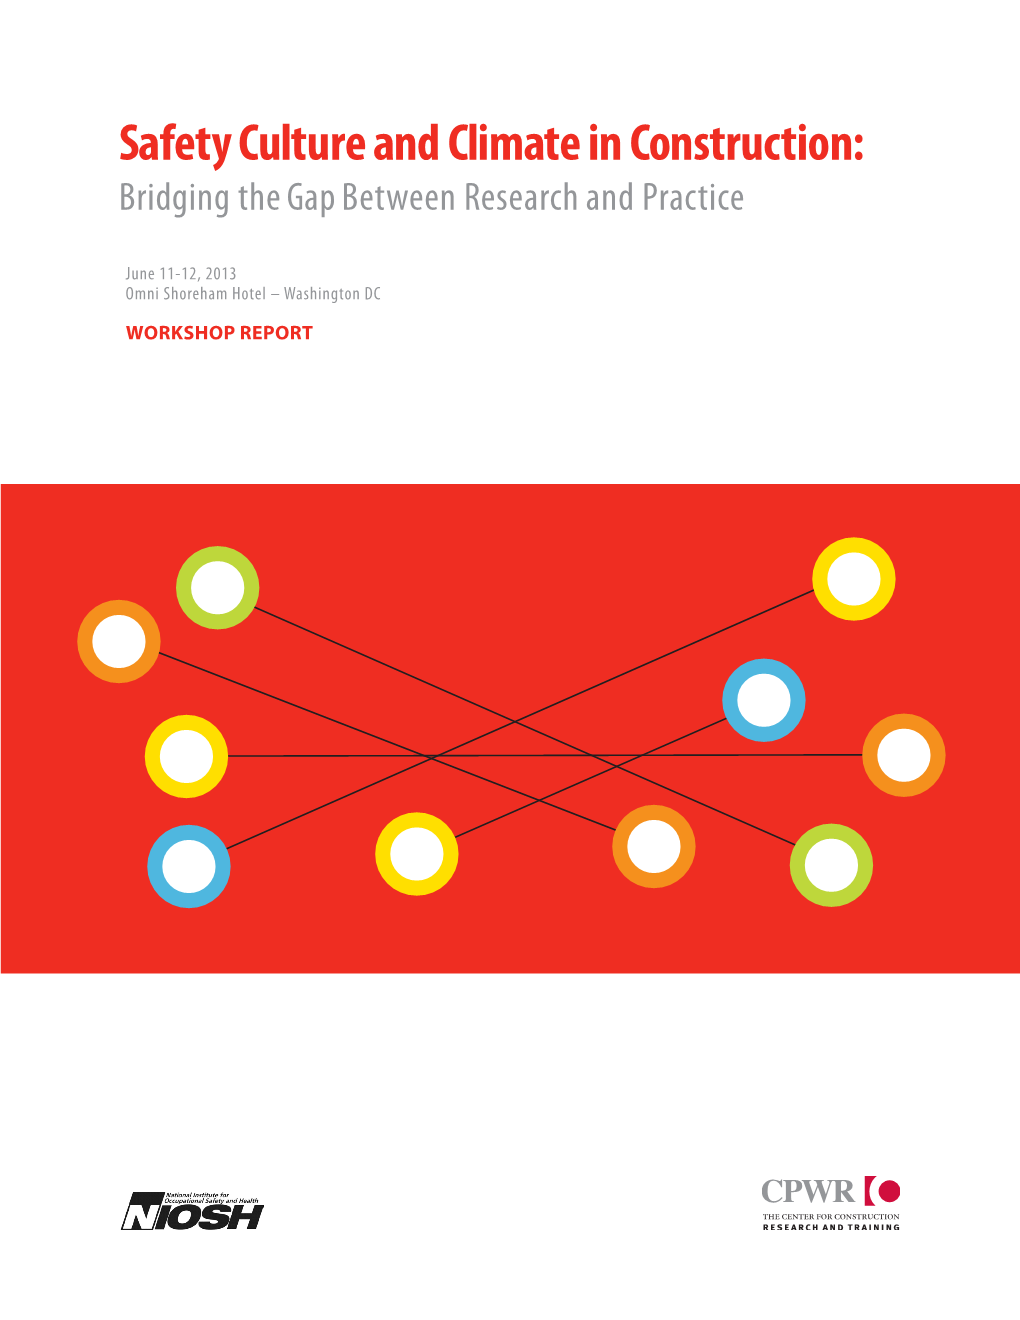 Safety Culture and Climate in Construction: Bridging the Gap Between Research and Practice